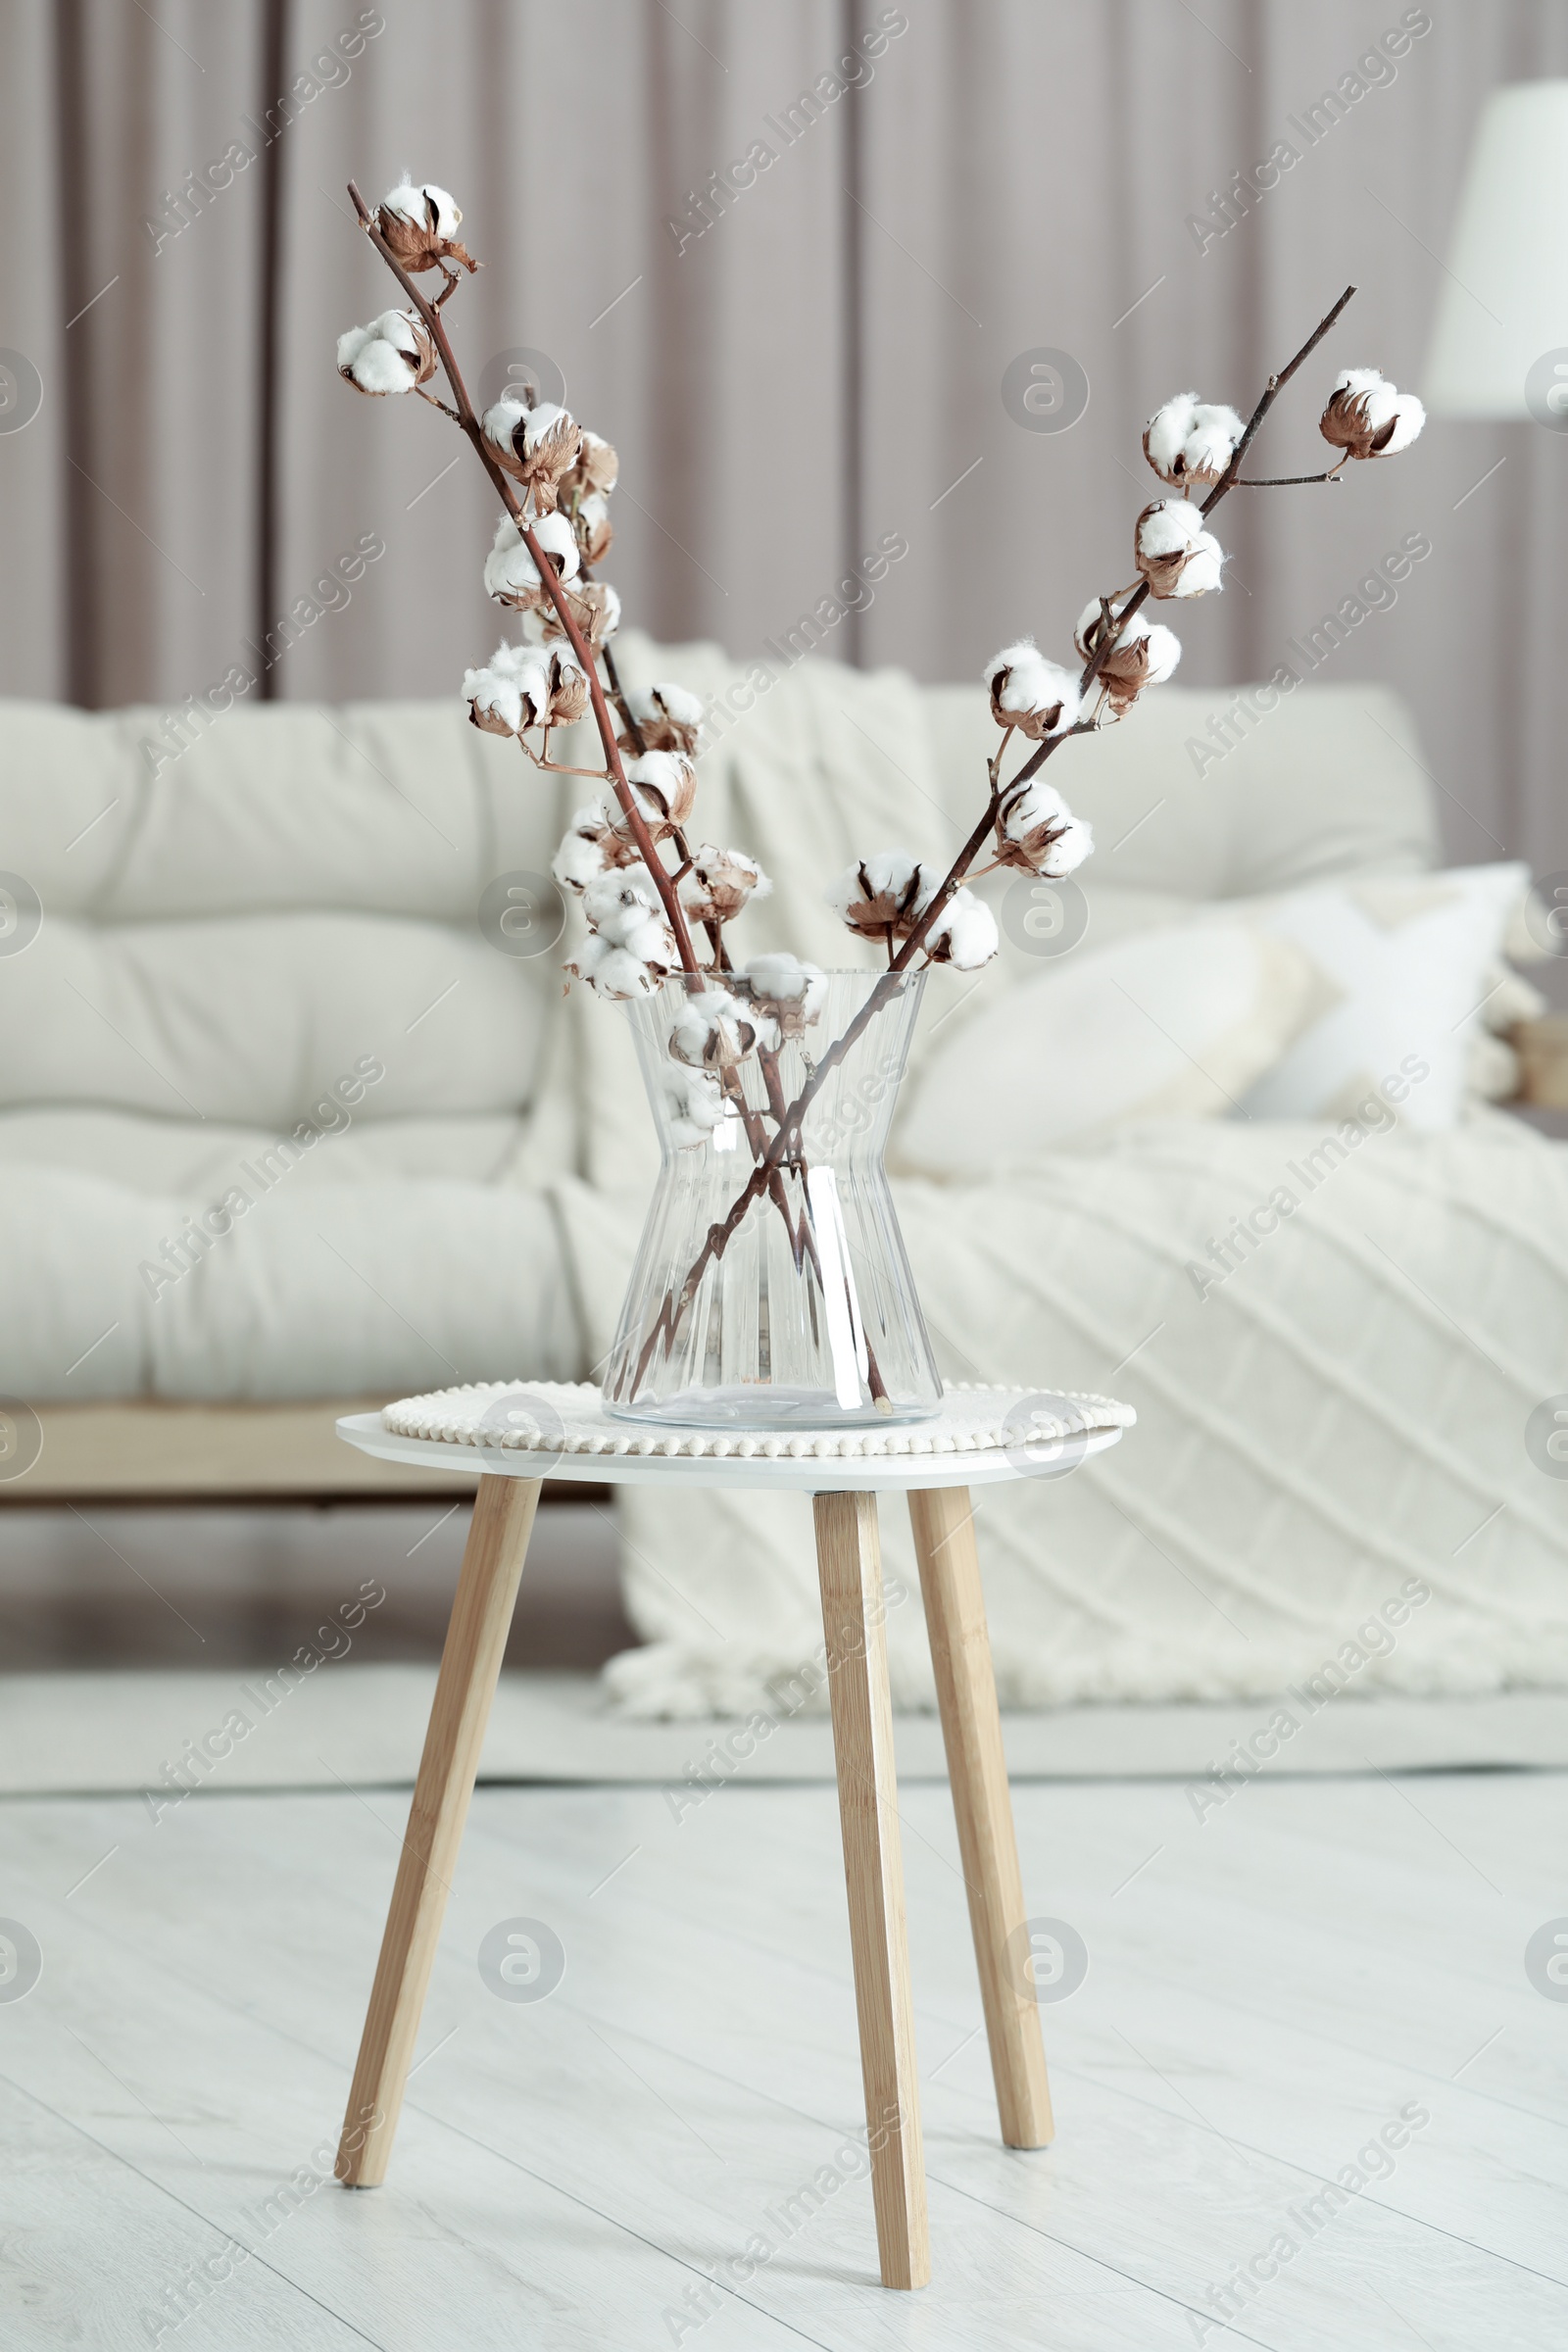 Photo of Branches with white fluffy cotton flowers on coffee table in cozy room. Interior design